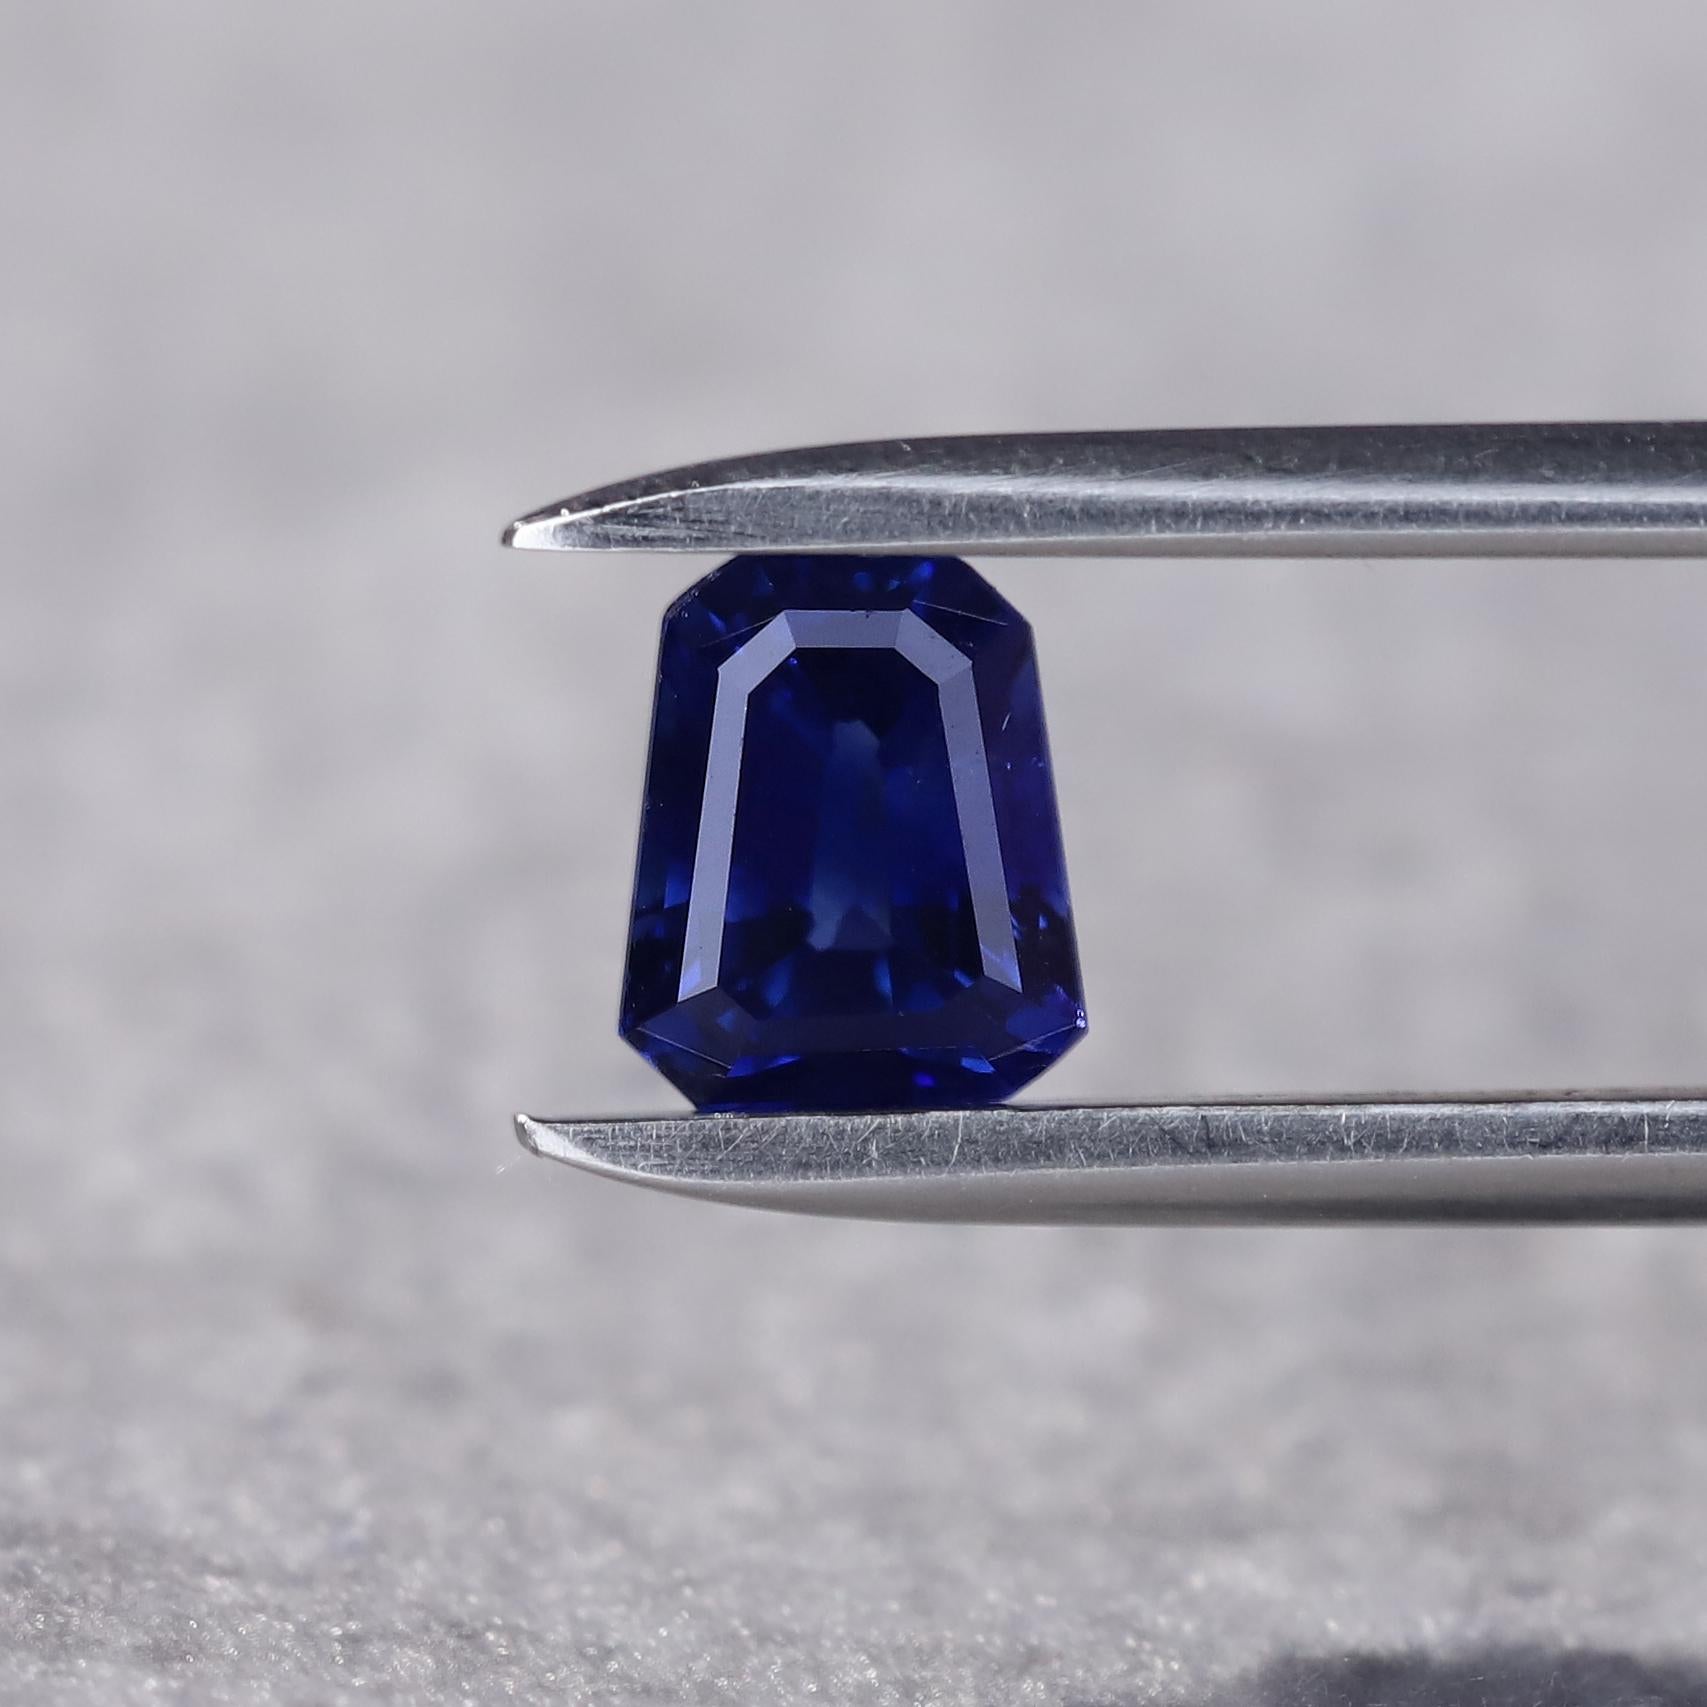 A unique shield-shaped natural sapphire in rich tones of midnight blue. A fascinating jewel despite being small. 

Natural midnight blue sapphire. Sourced from Ceylon. 1.39 ct 

This magnificent blue sapphire by KNS Gems is available for purchase as